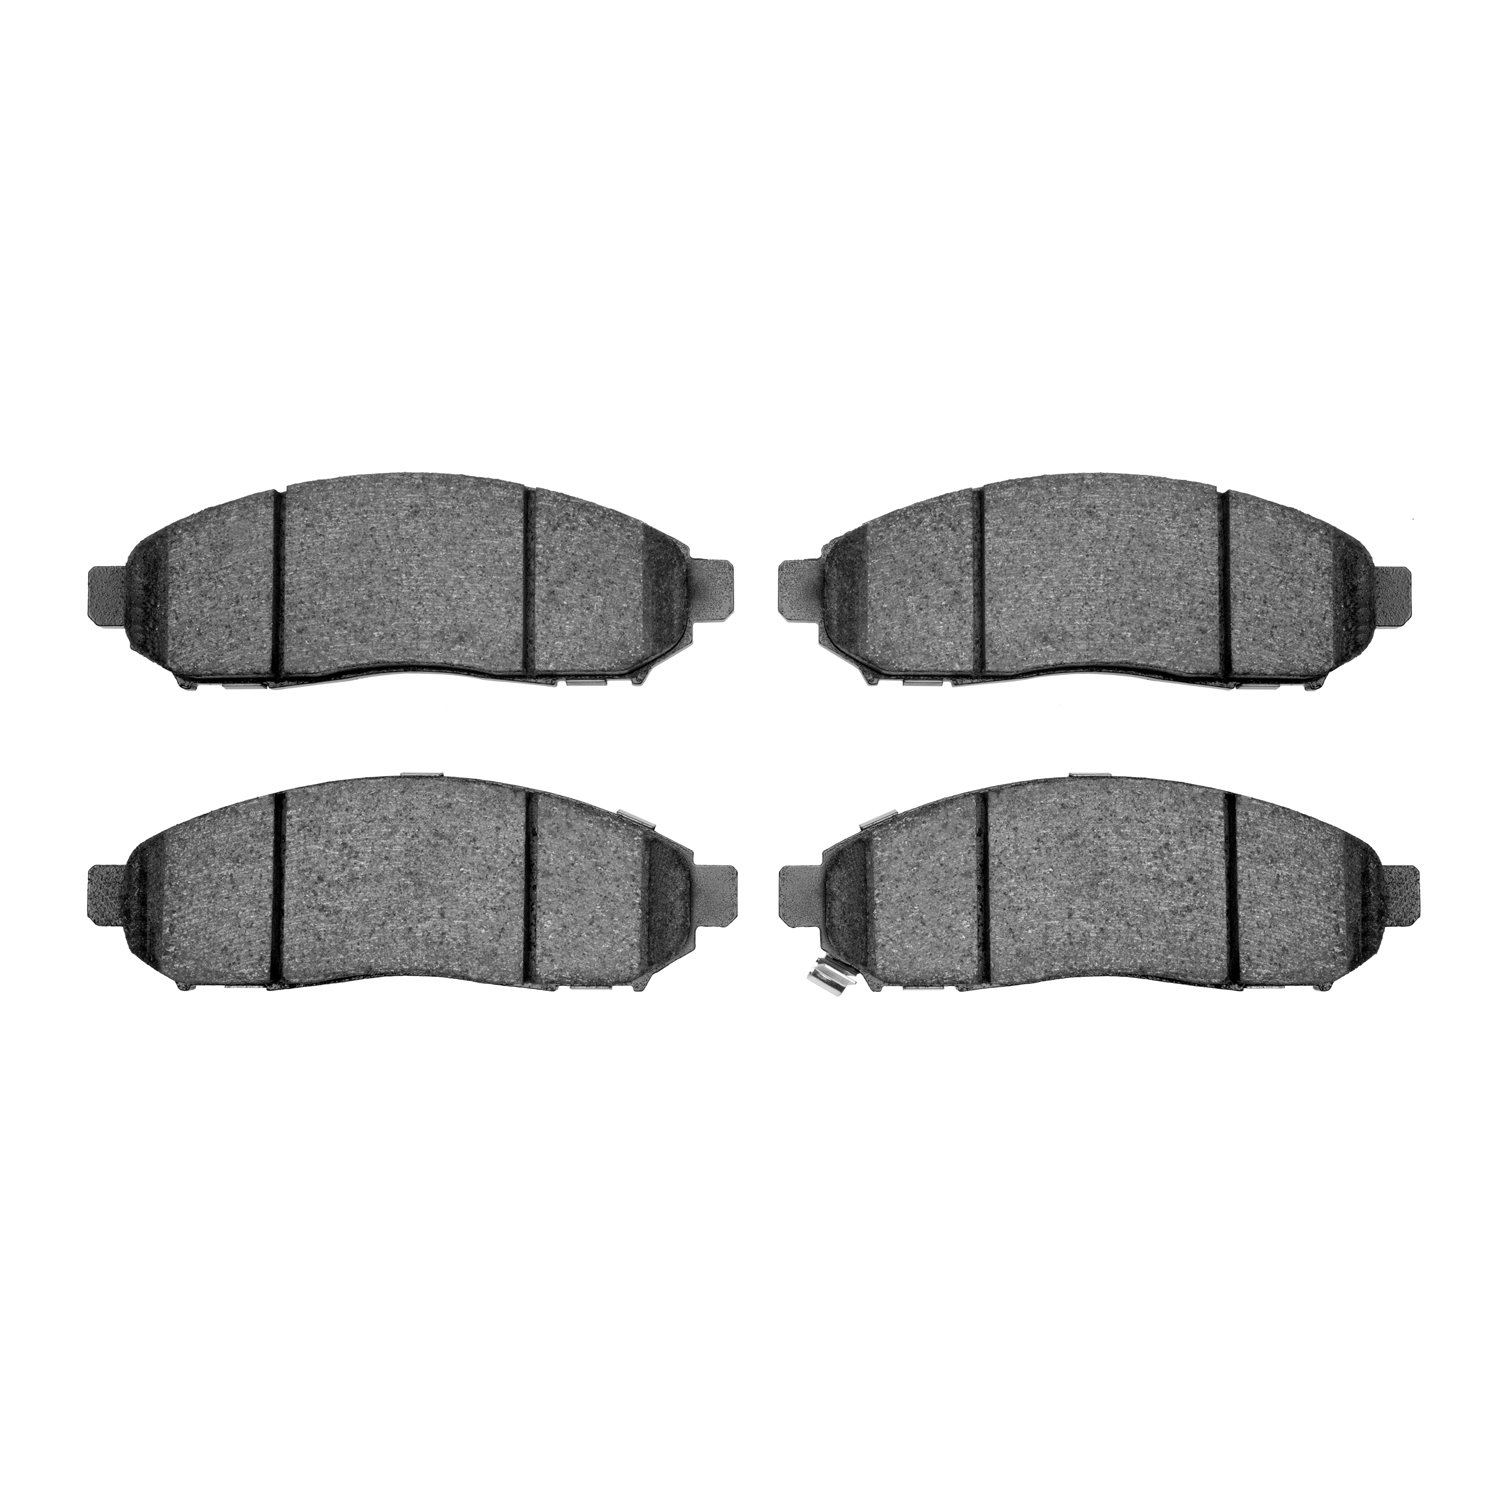 1311-1094-00 3000-Series Semi-Metallic Brake Pads, Fits Select Multiple Makes/Models, Position: Front